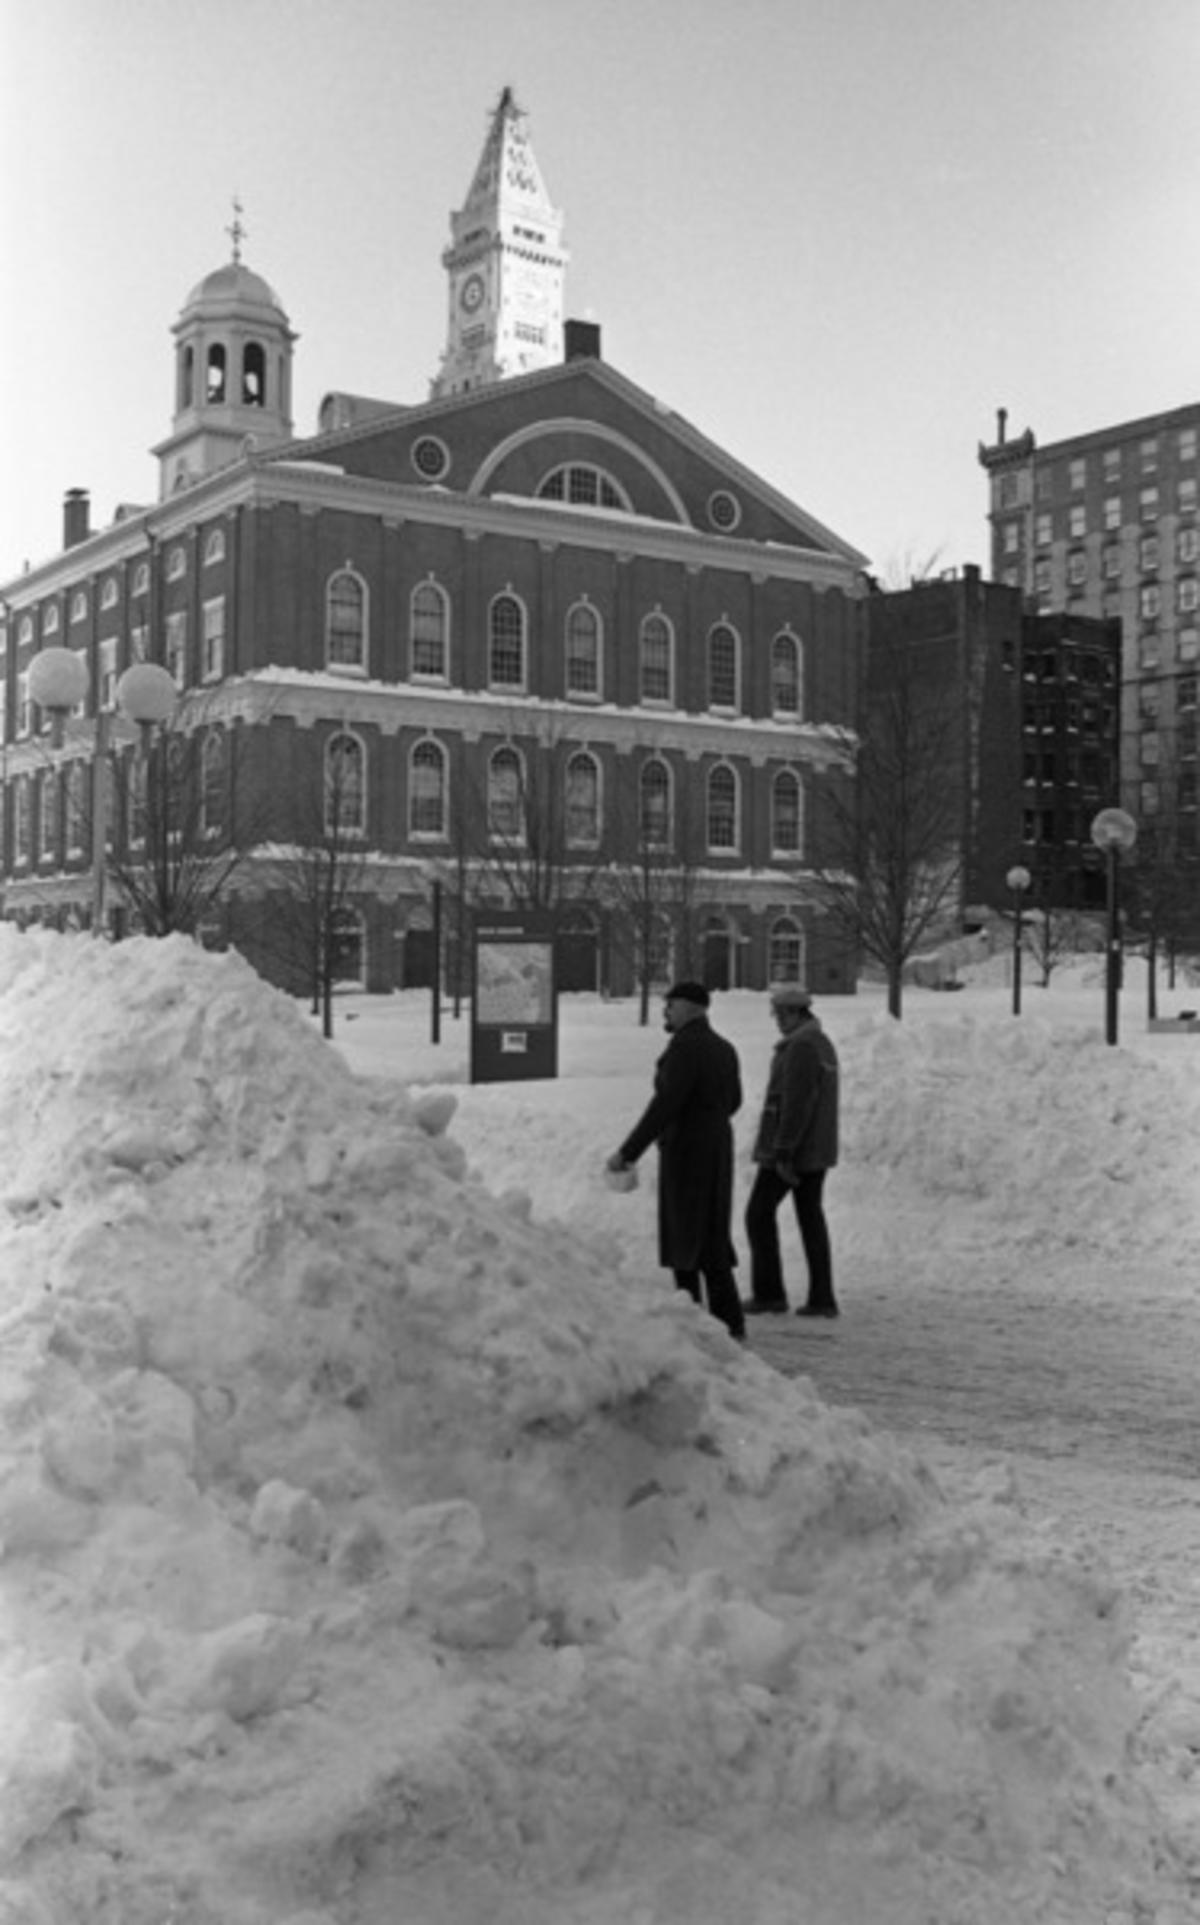 Snow piles and pedestrians in front of Faneuil Hall